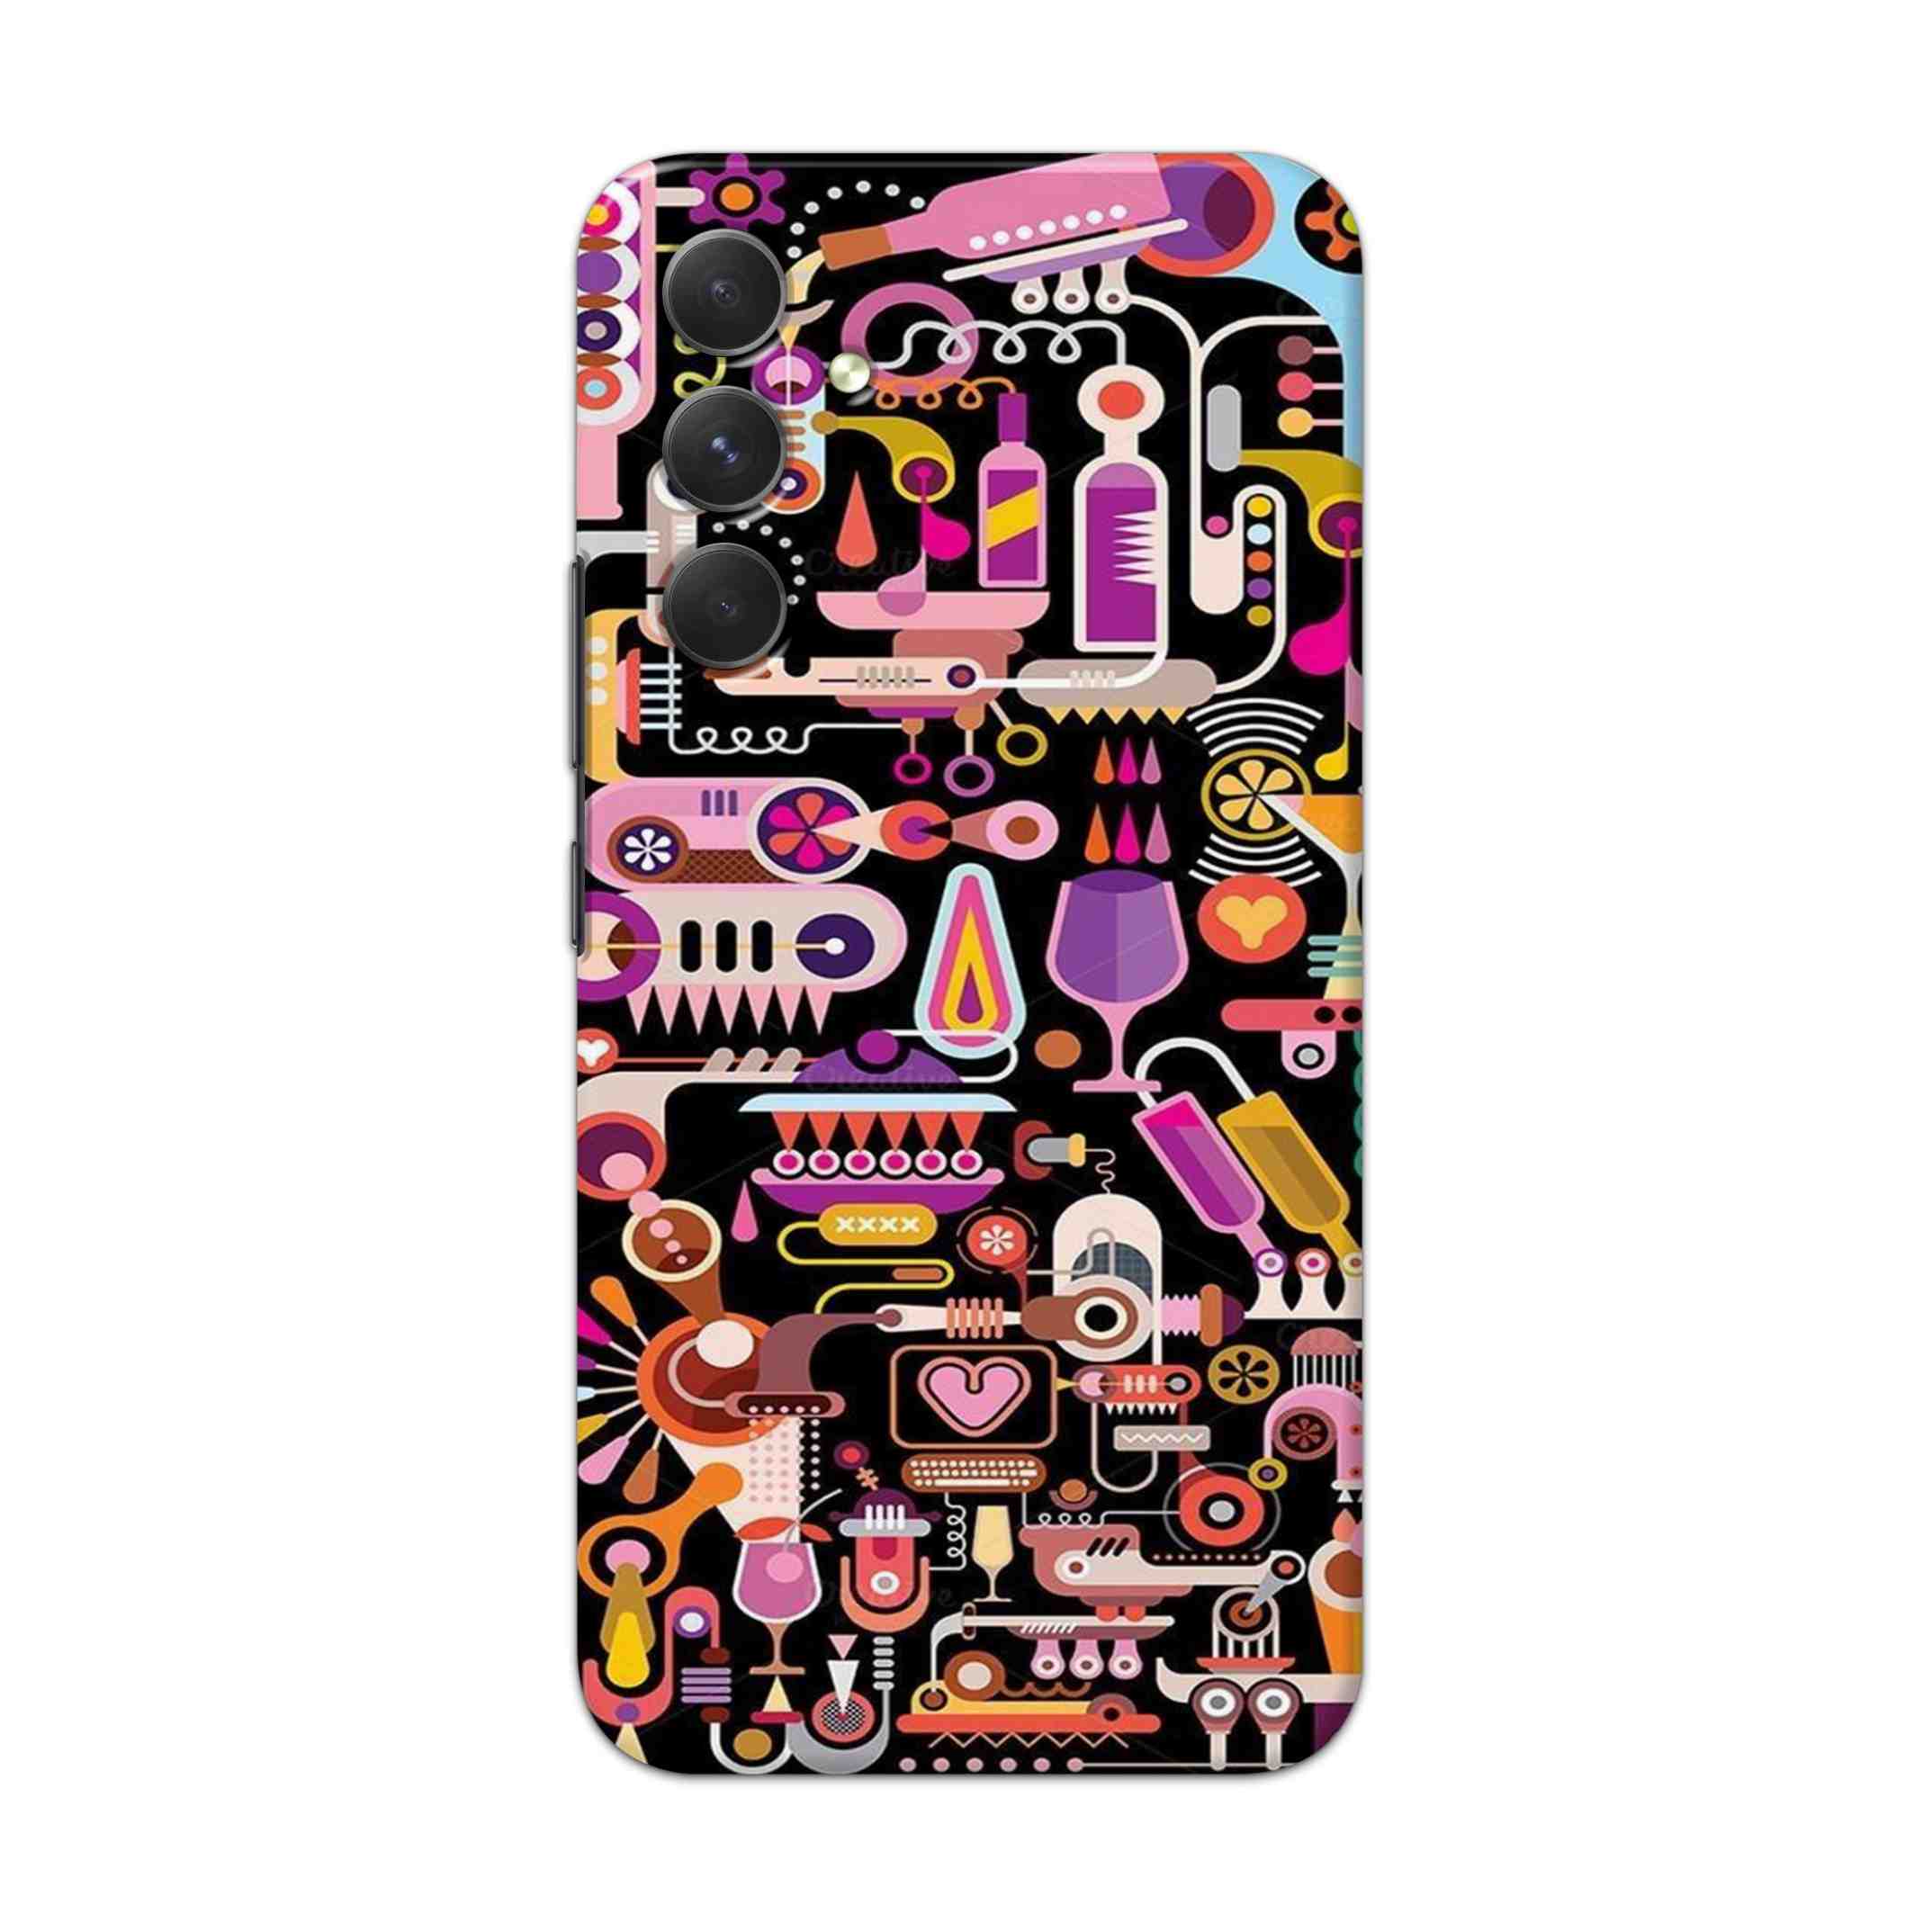 Buy Lab Art Hard Back Mobile Phone Case Cover For Samsung Galaxy A54 5G Online